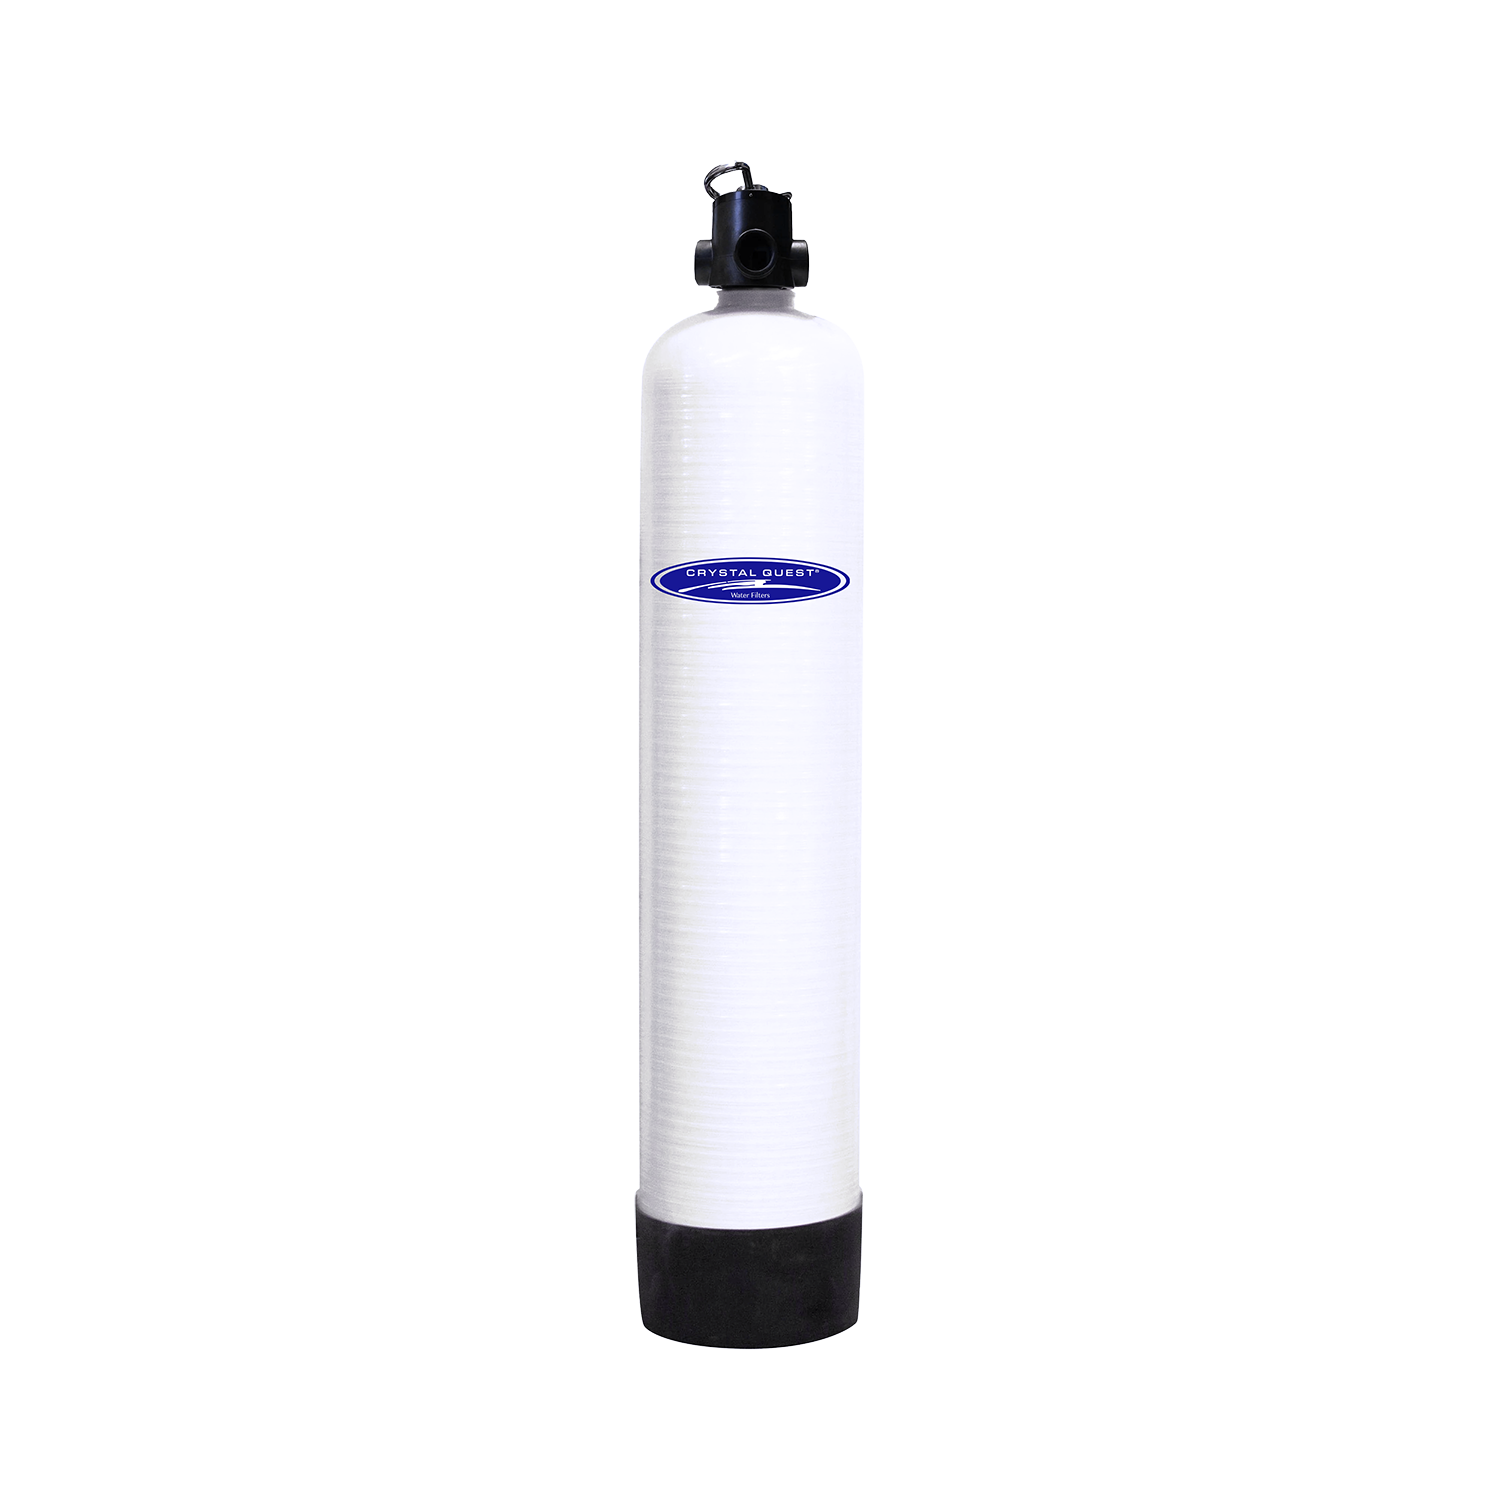 15 GPM / Aluminum Oxide / Manual (Downflow w/ Backwash) Fluoride Removal Water Filtration System - Commercial - Crystal Quest